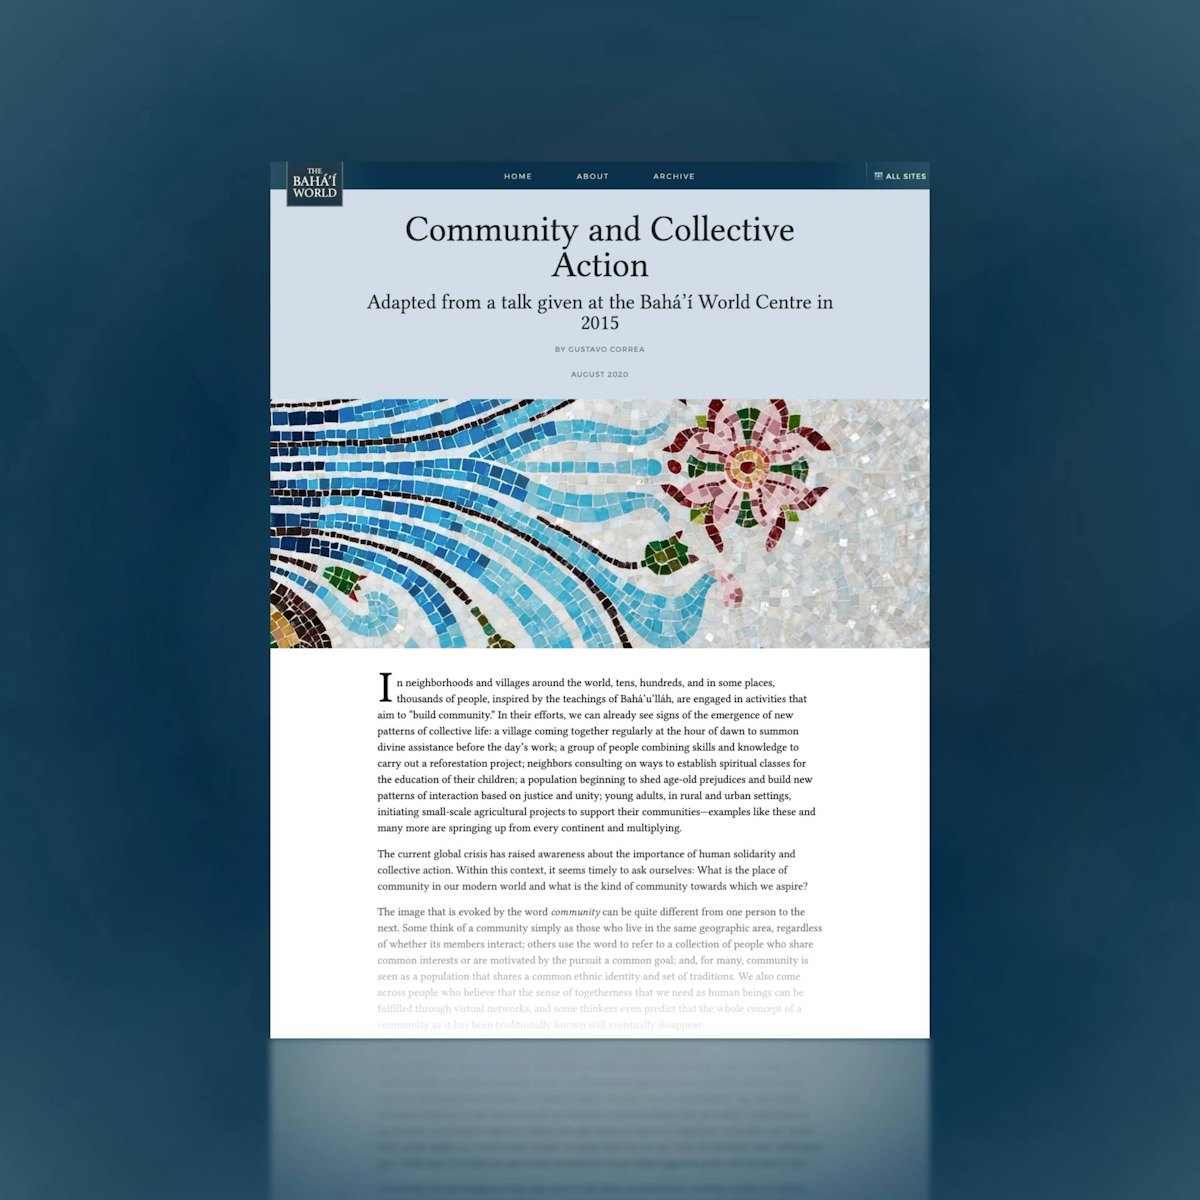 The essay “Community and Collective Action” describes the hopeful efforts of groups of people around the world to build a new kind of community based on the oneness of humankind and explores the vision and process guiding these efforts.